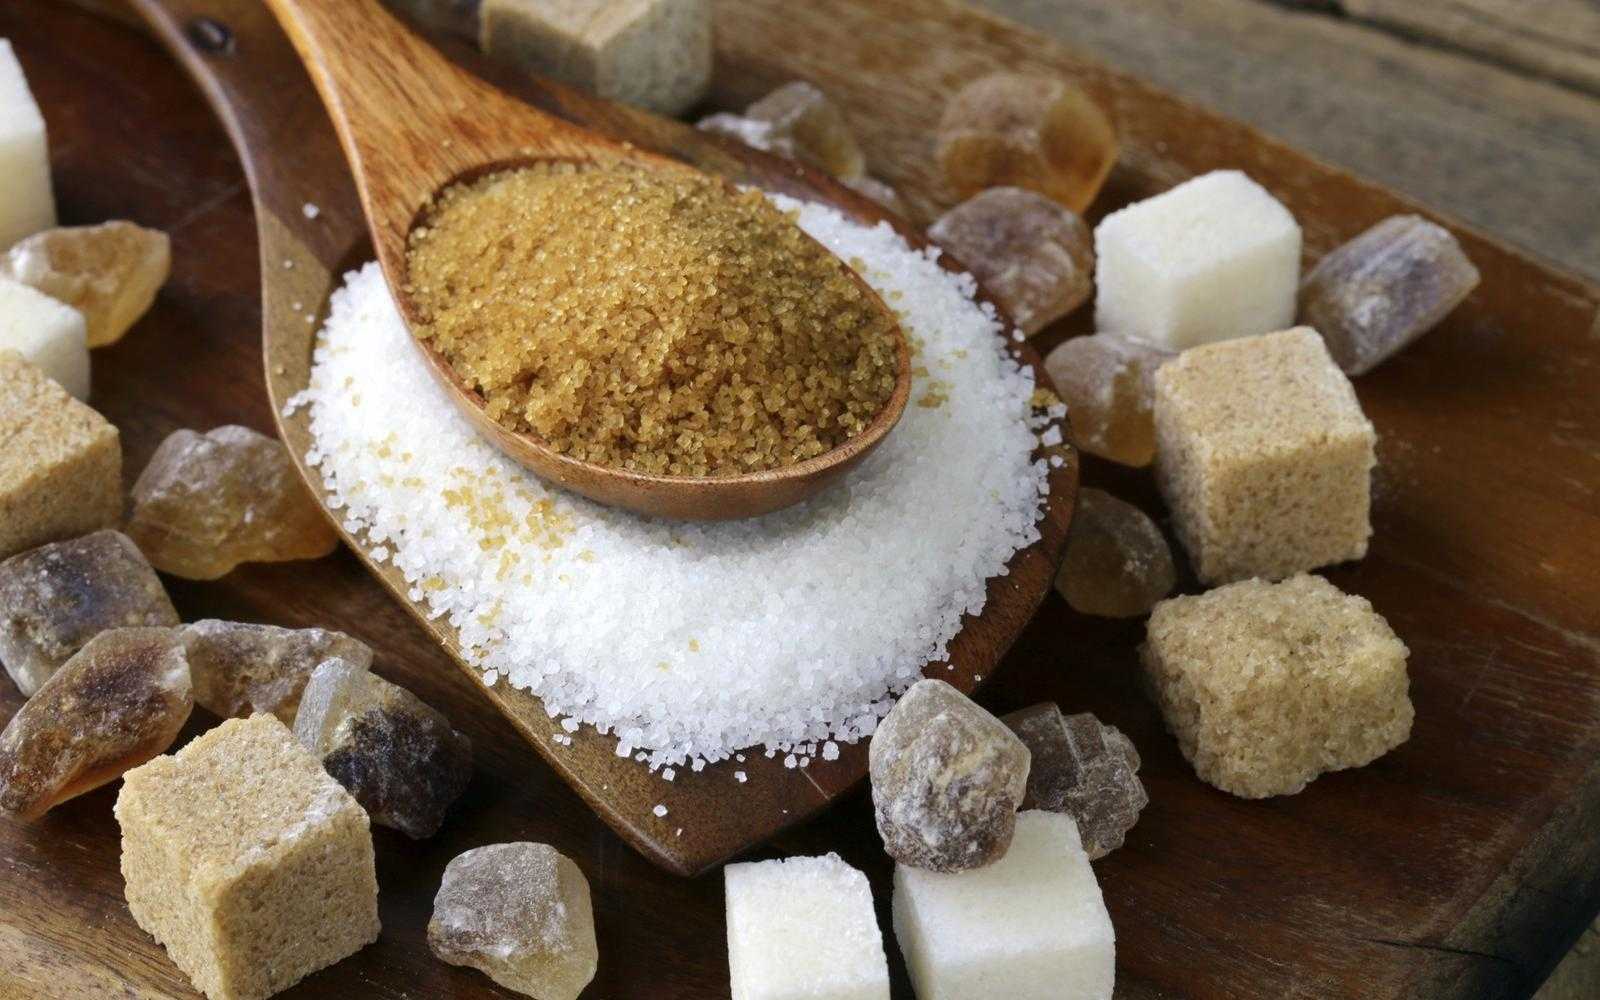 There could be sugars in your diet that you don't know about